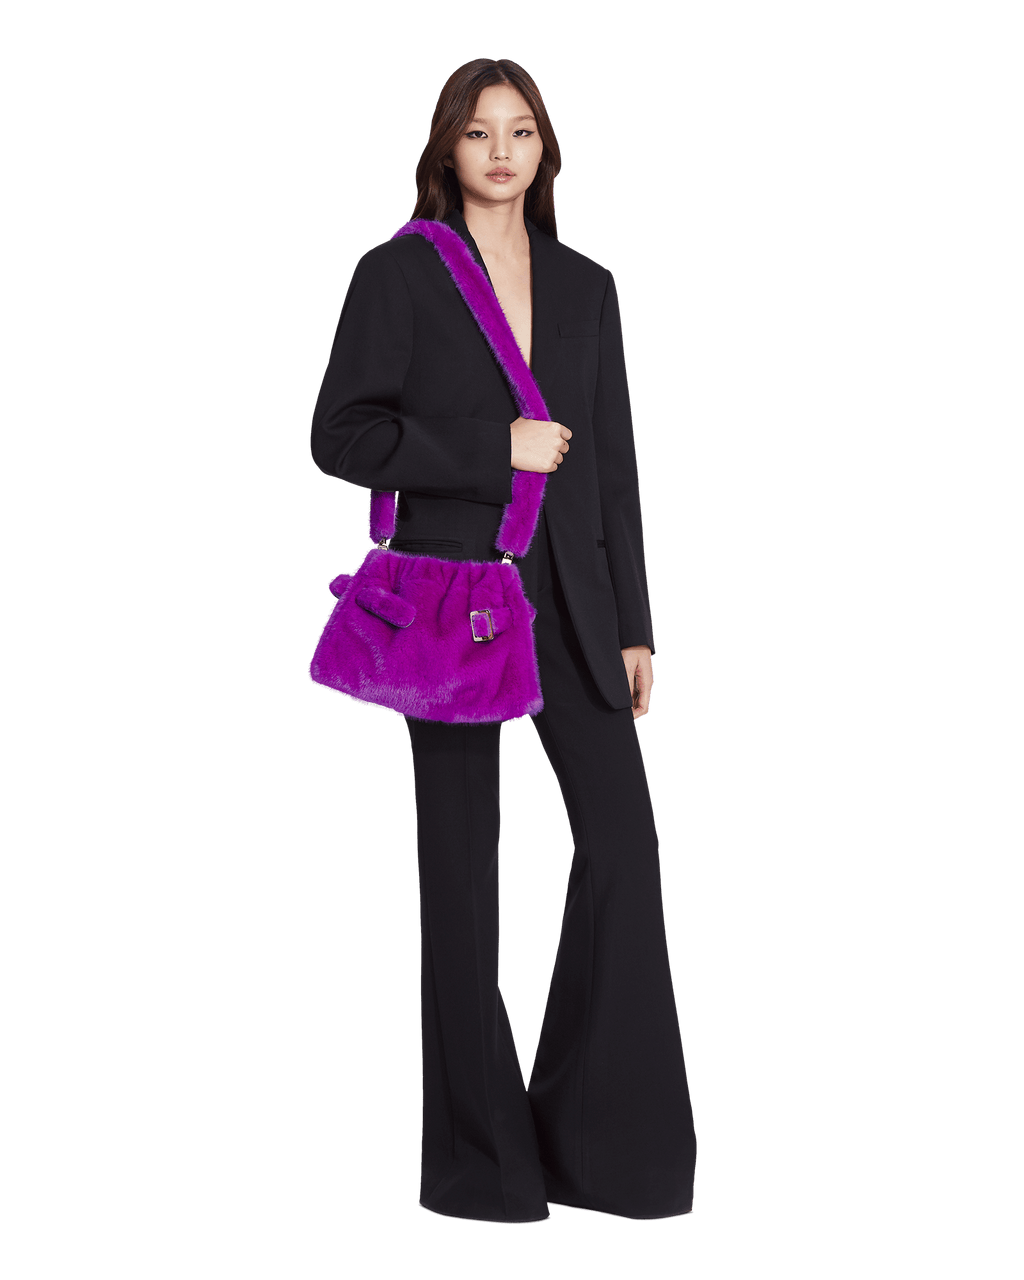 Medium, rectangular purple minky pouch with a metal buckle and, a belt, and a shoulder strap.